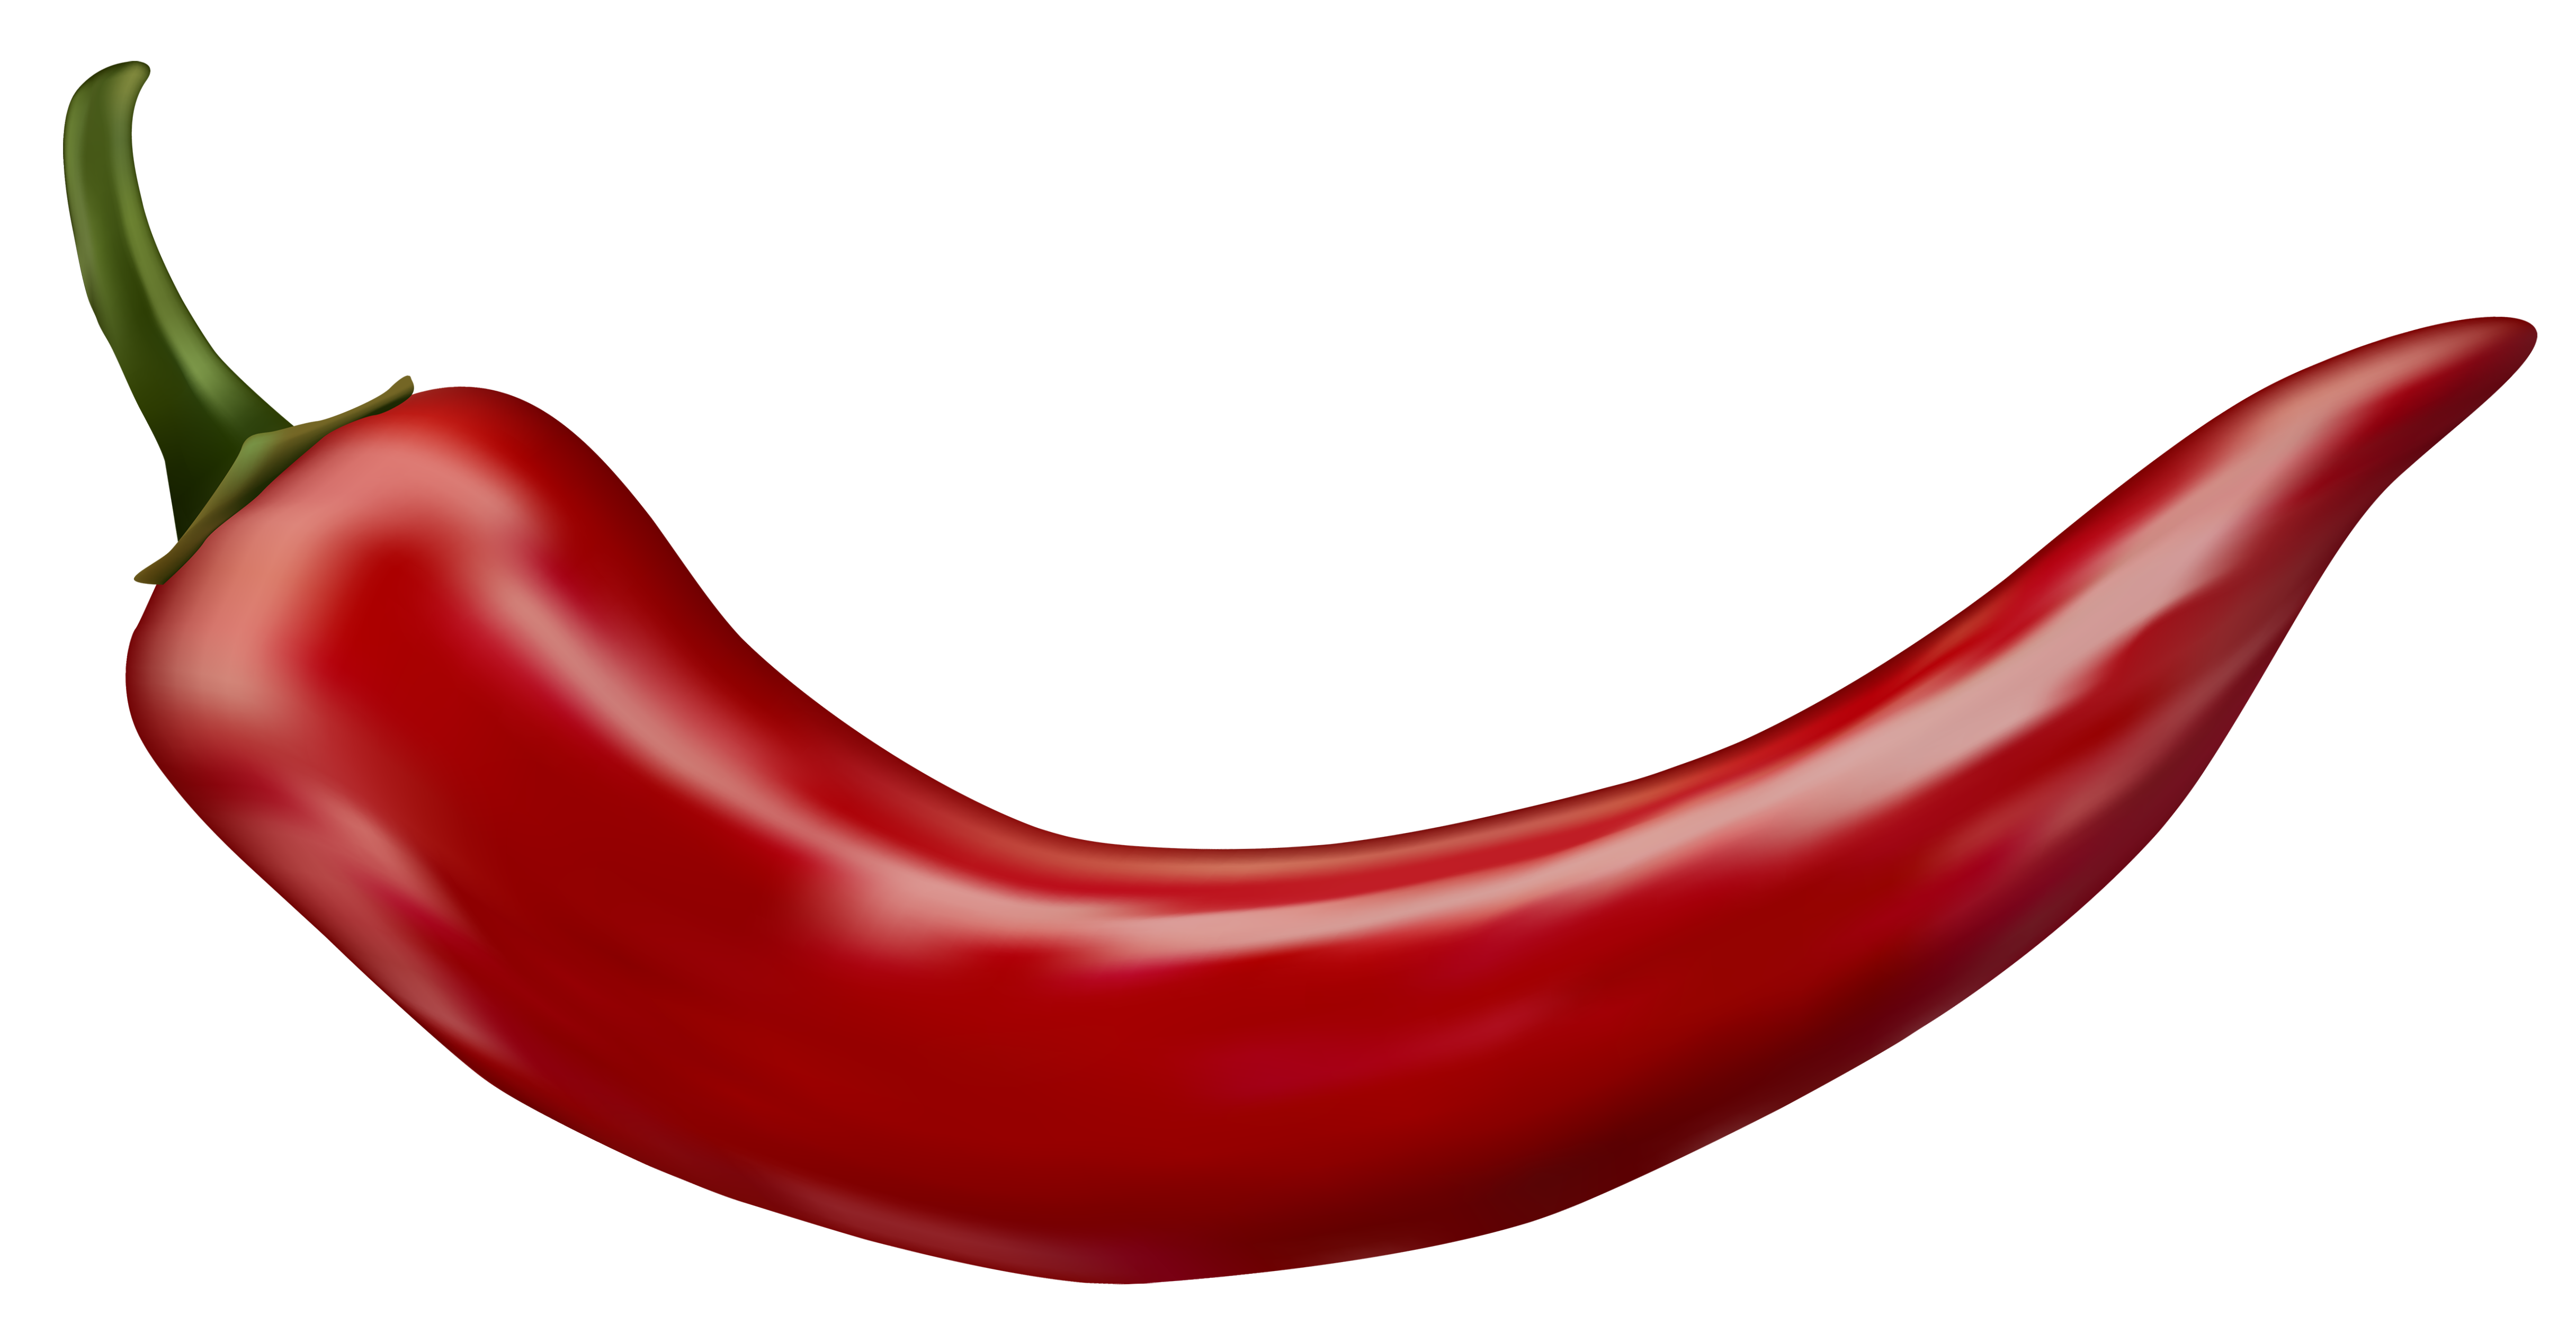 Red Chili Pepper Transparent PNG Clip Art Image | Gallery ...